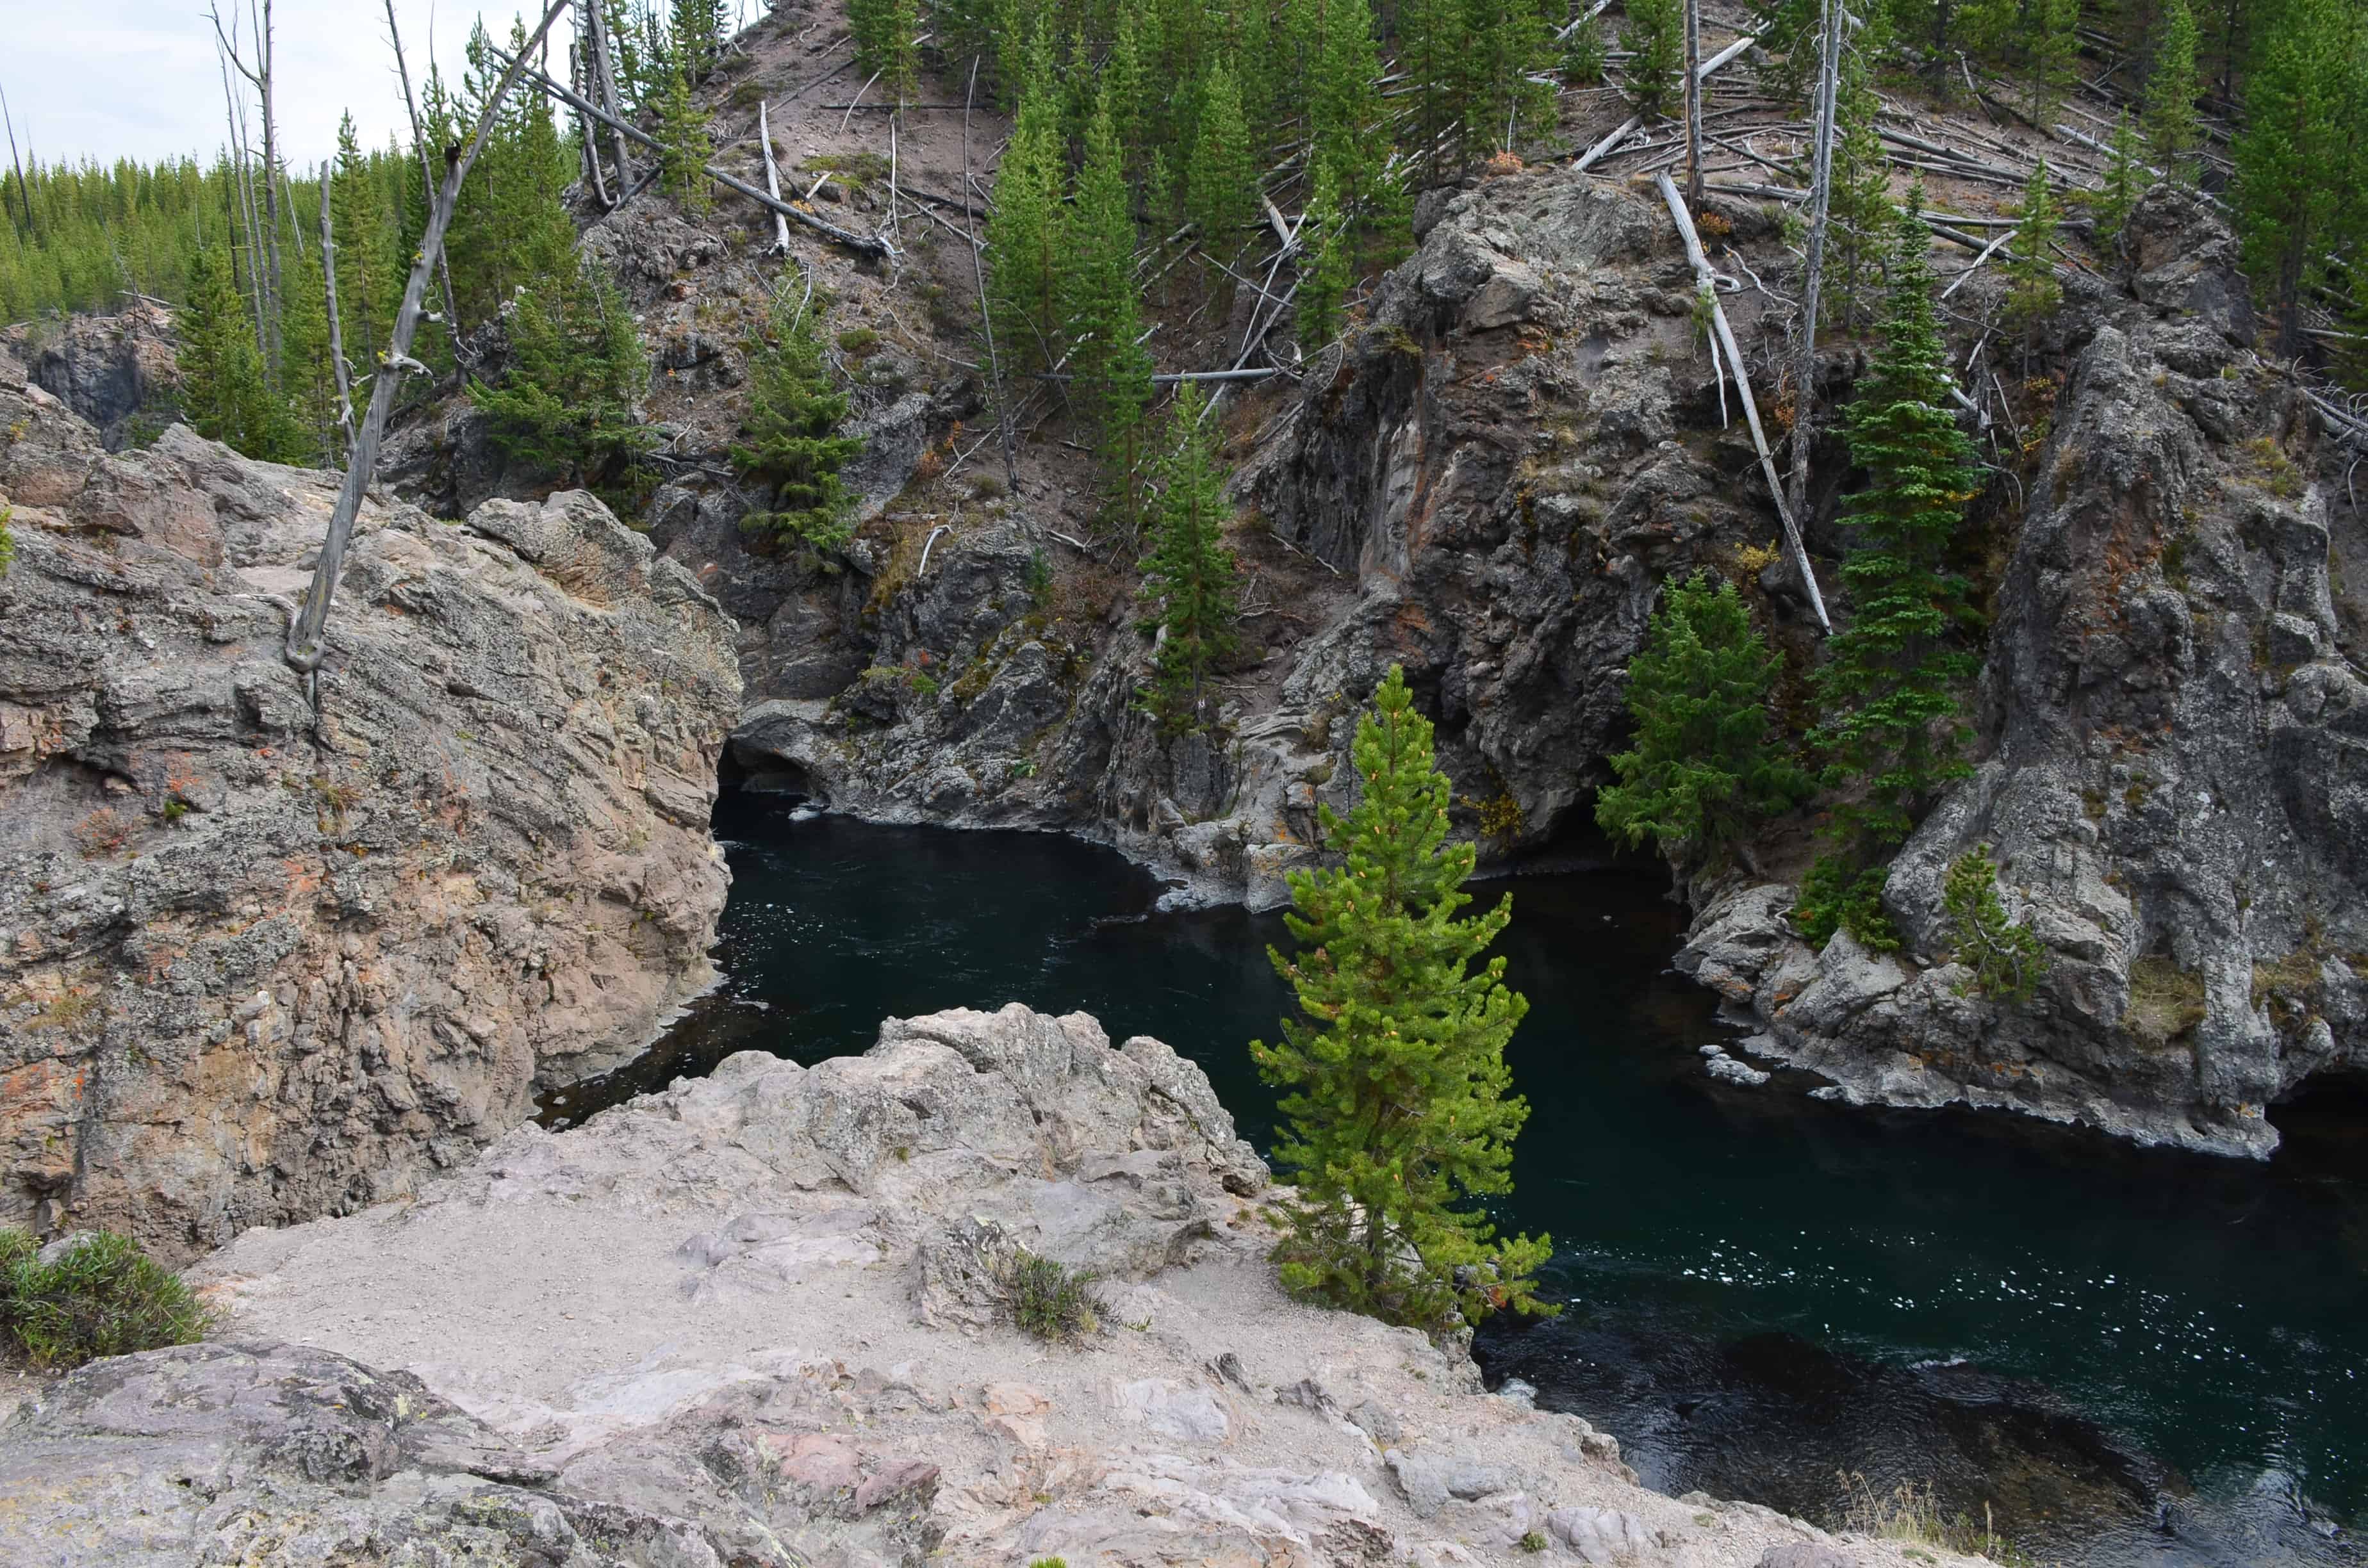 Float through the canyon here at Firehole Canyon Drive in Yellowstone National Park, Wyoming